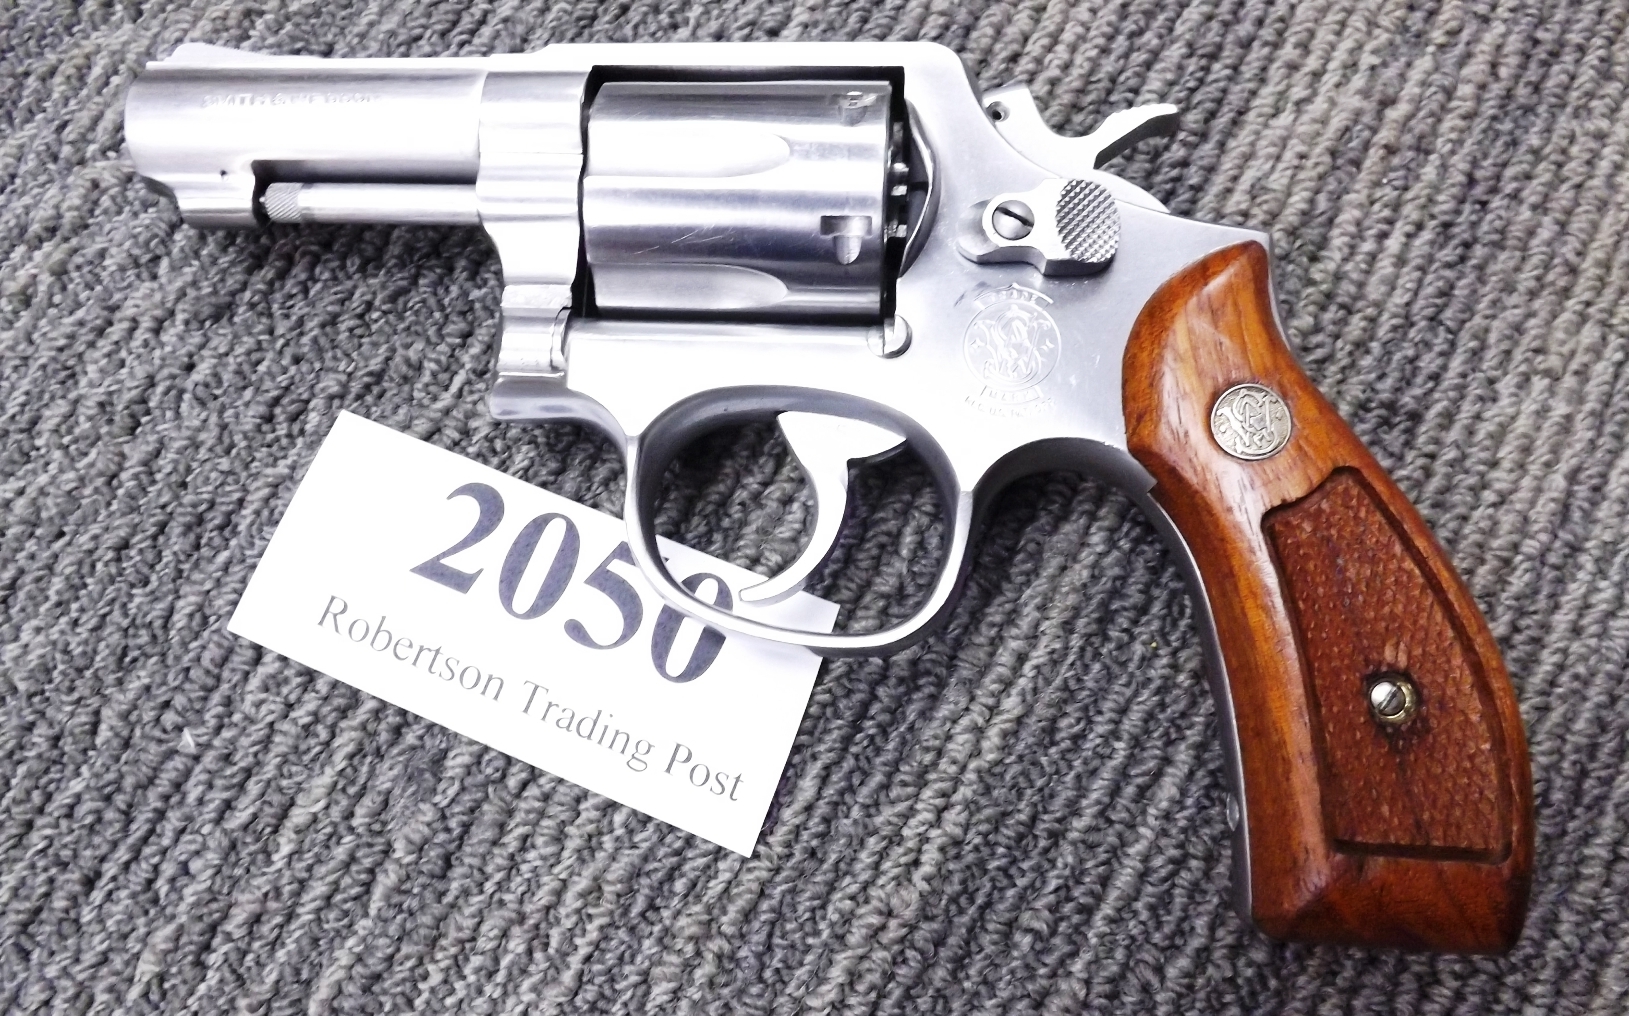 S&W .357 model 65-3 Stainless 3” Round Butt 1986 VG-Exc Revolver Smith & Wesson